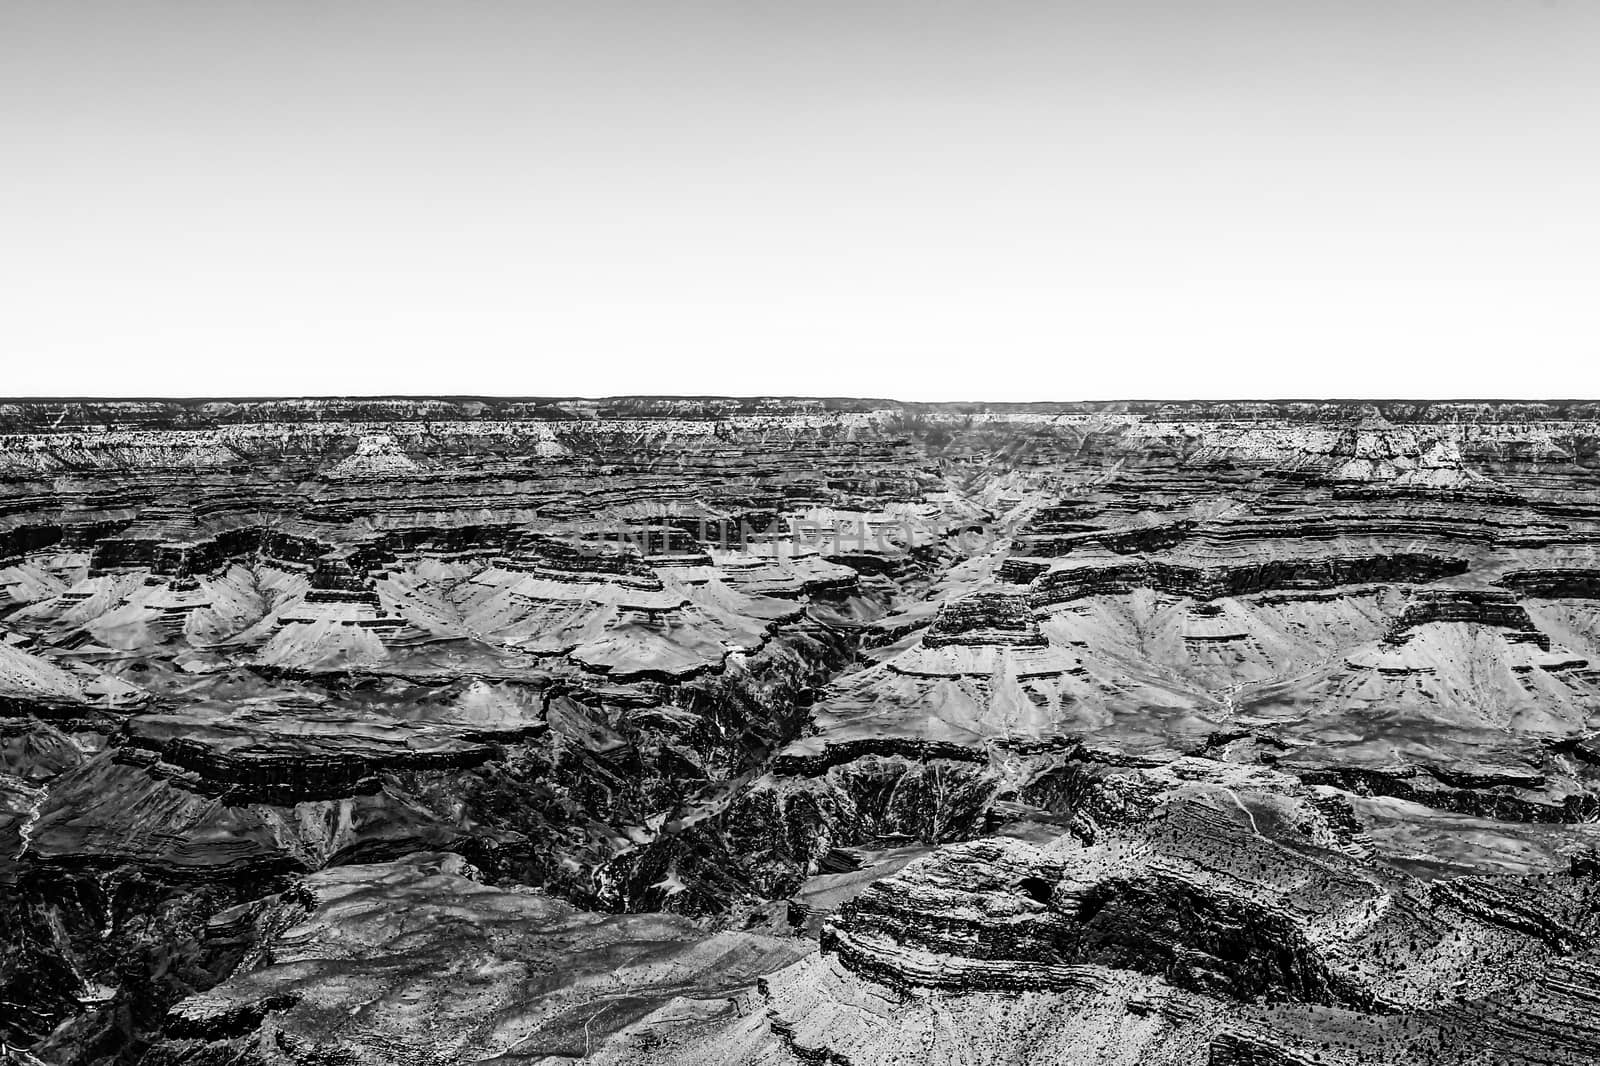 Grand Canyon national park, USA in black and white